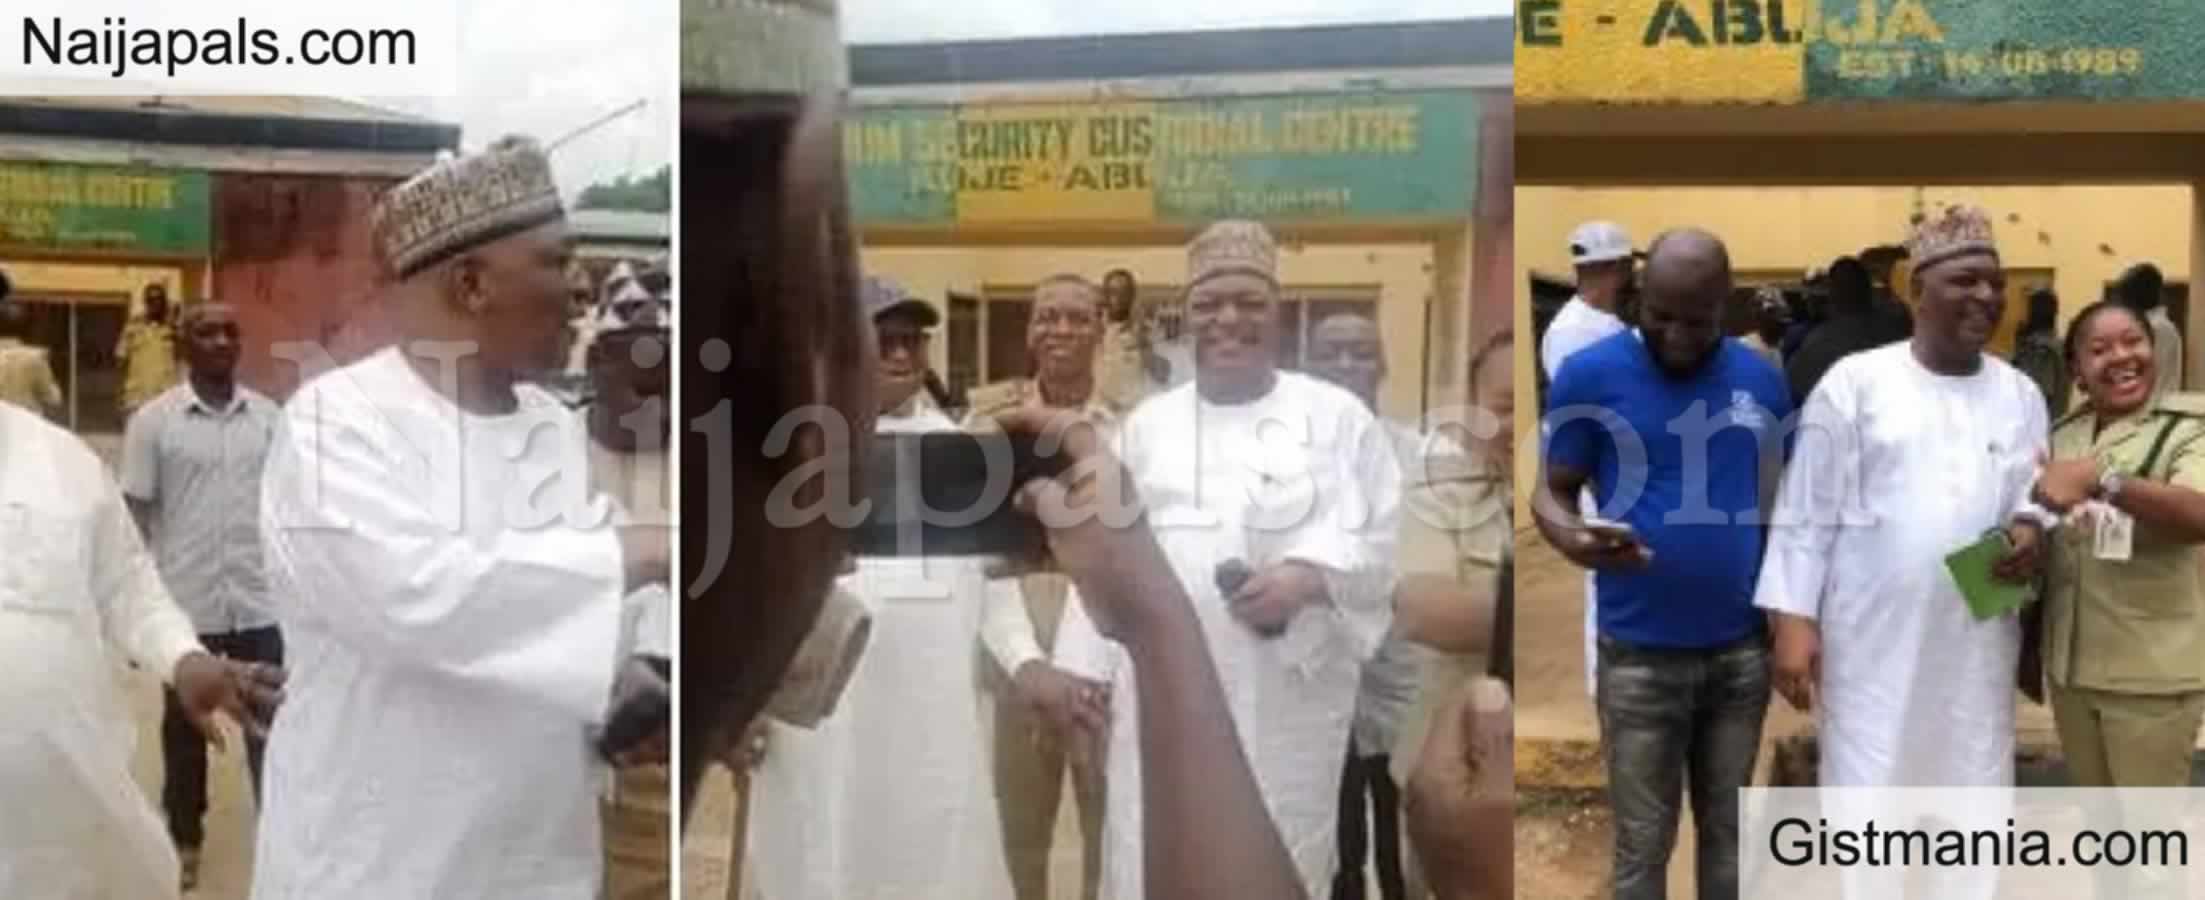 <img alt='.' class='lazyload' data-src='https://img.gistmania.com/emot/video.gif' /> Video Of <b>Nigerians Jubilating Over Ex-Gov. Dariye and Nyame Being Released From Prison</b>